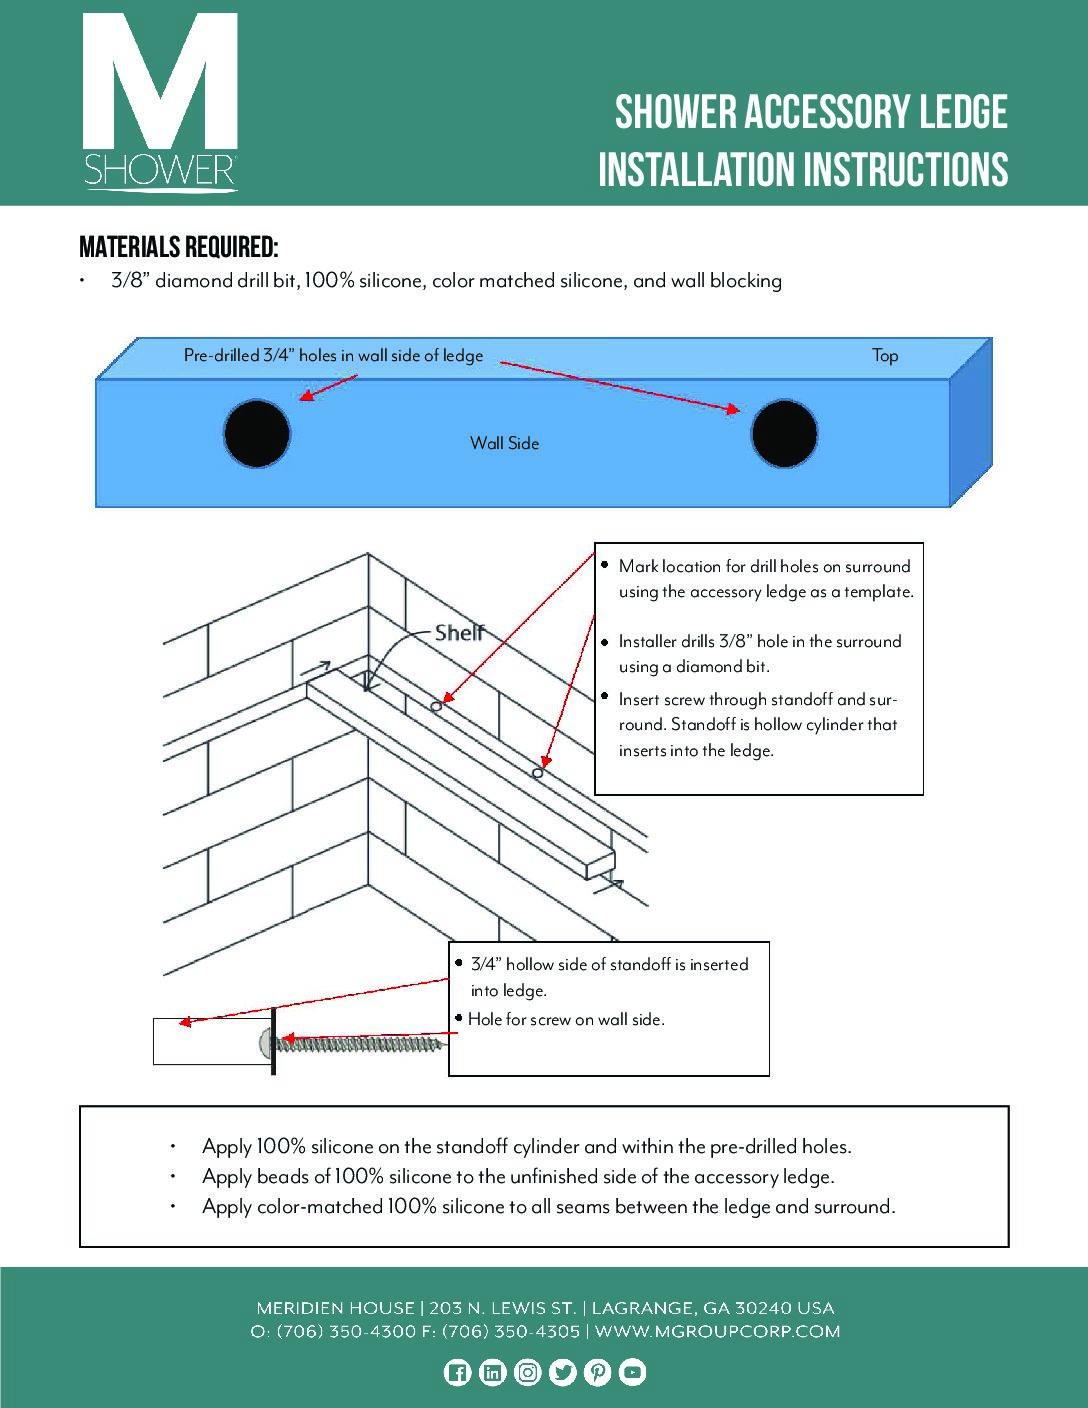 Shower Accessory Ledge Installation Instructions